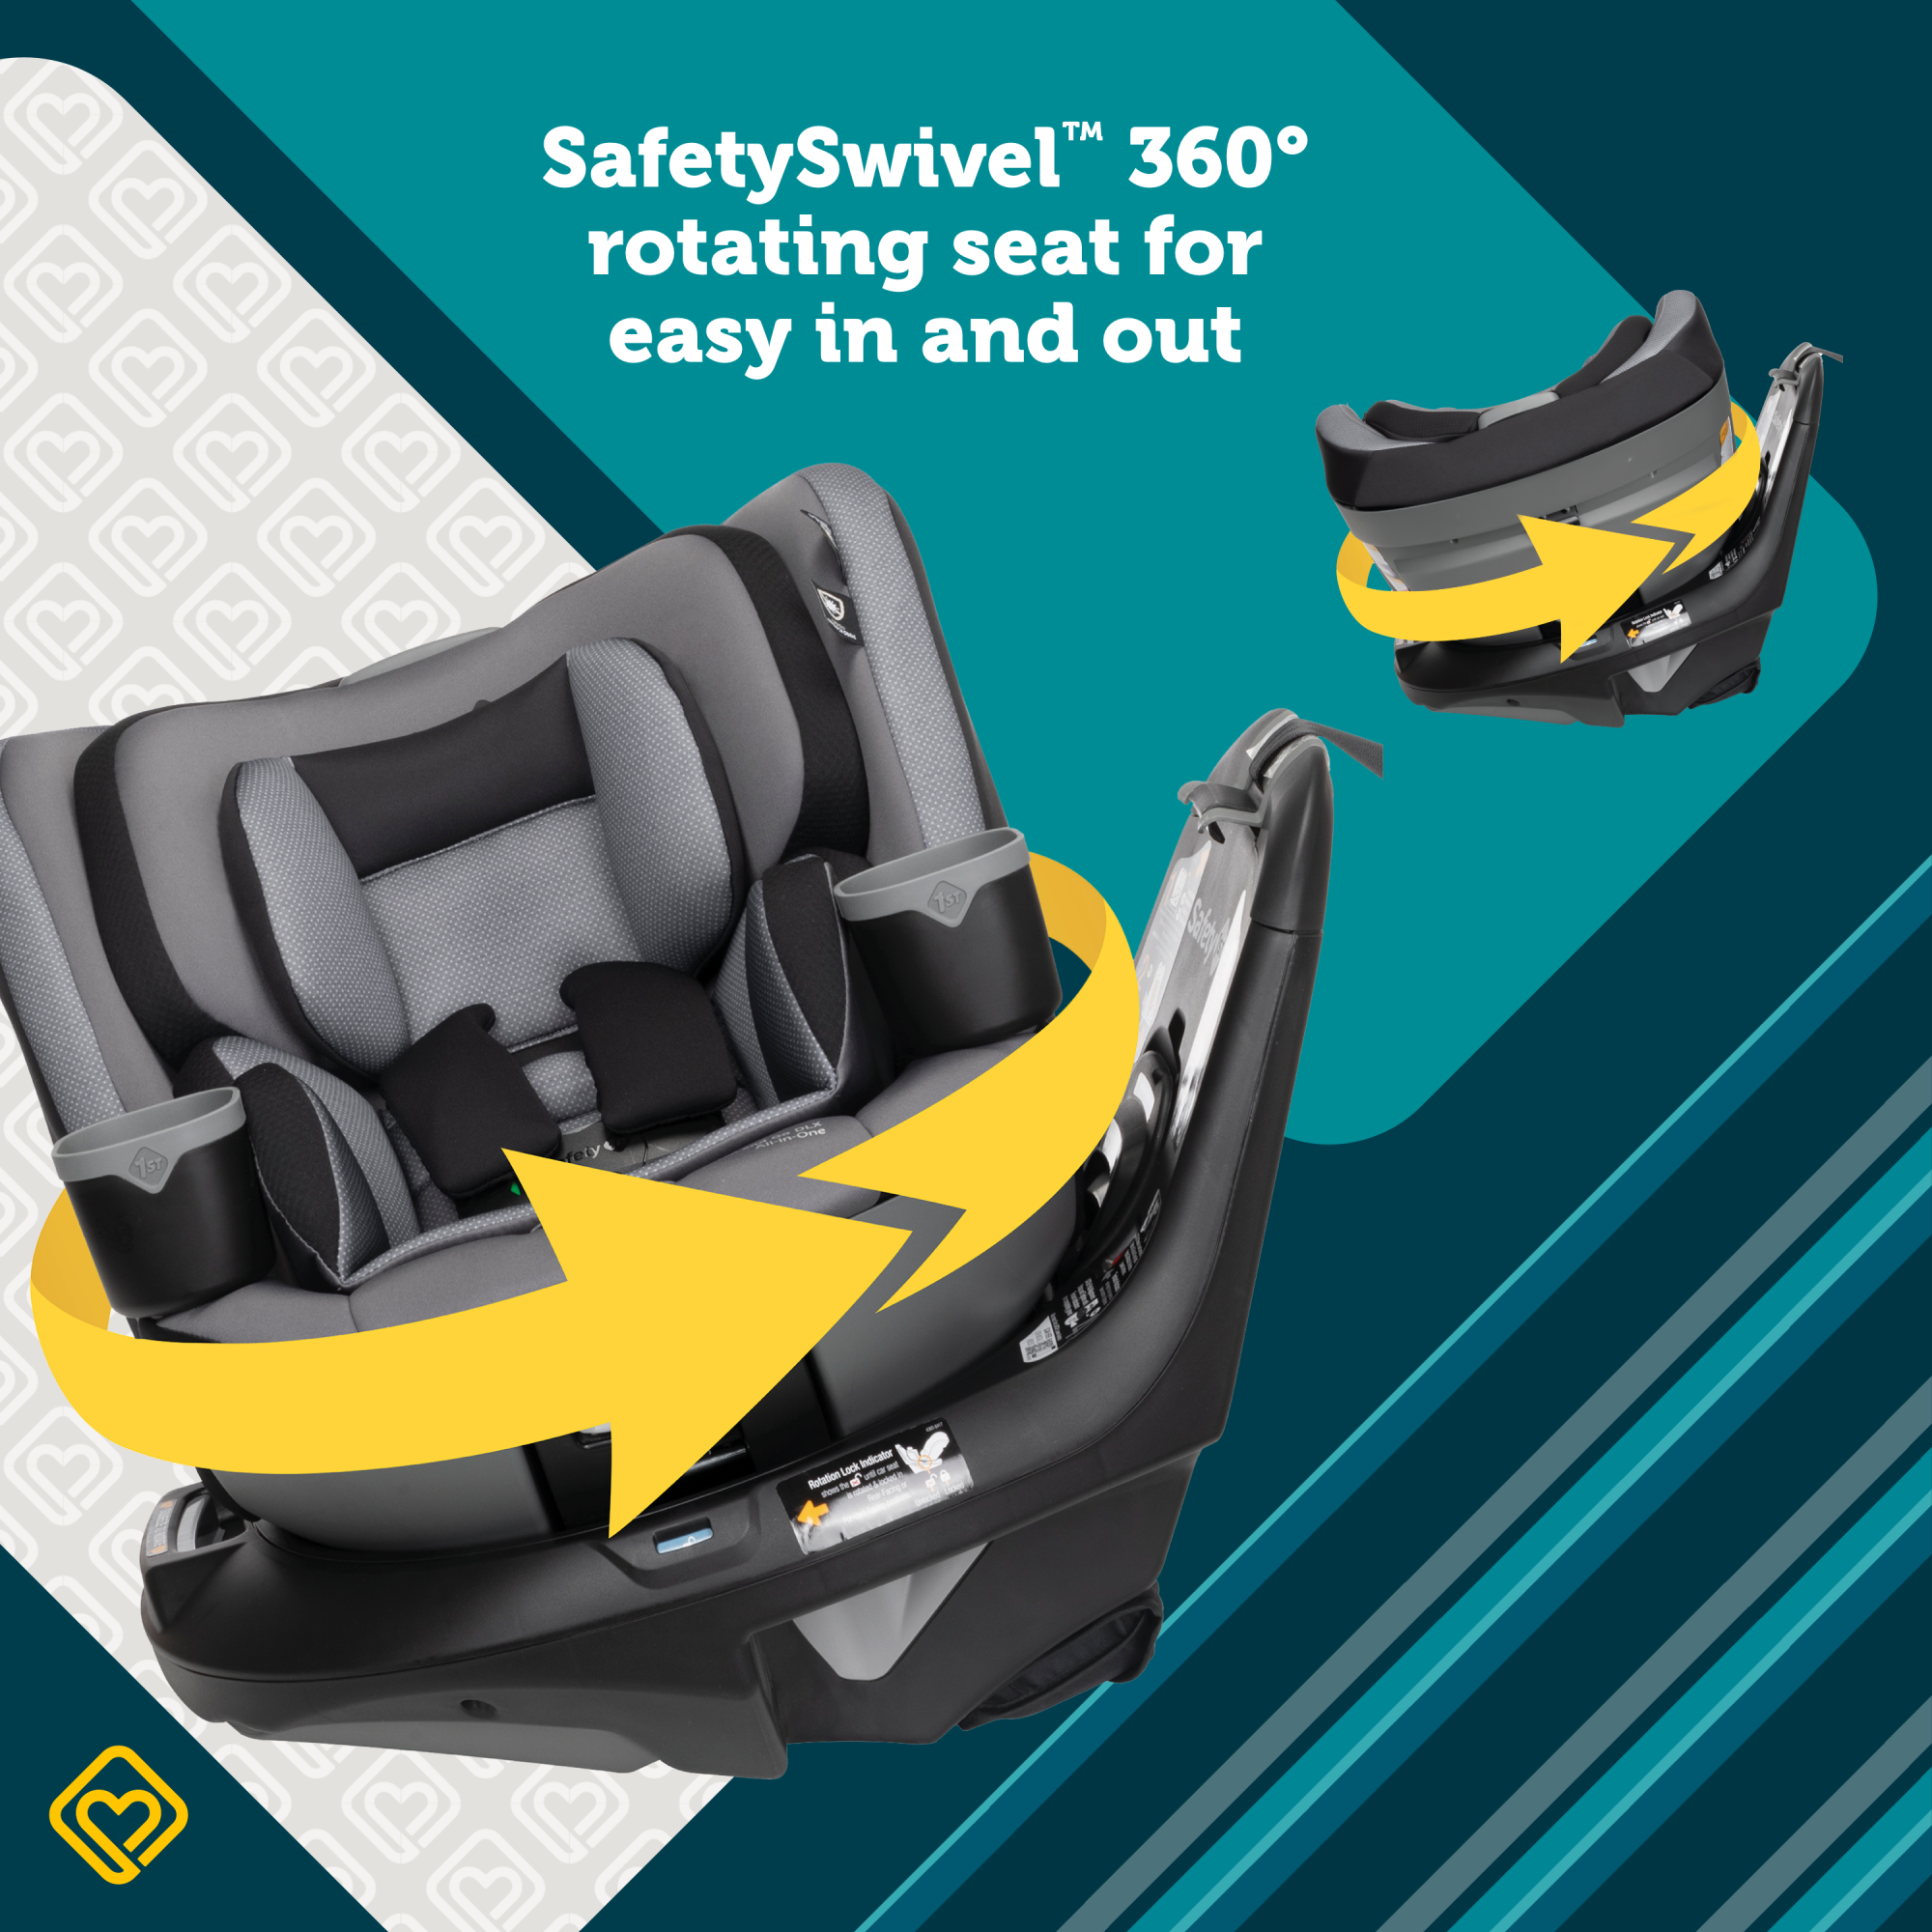 Turn and Go 360 DLX Rotating All-in-One Convertible Car Seat - removable, dishwasher-safe cup holders